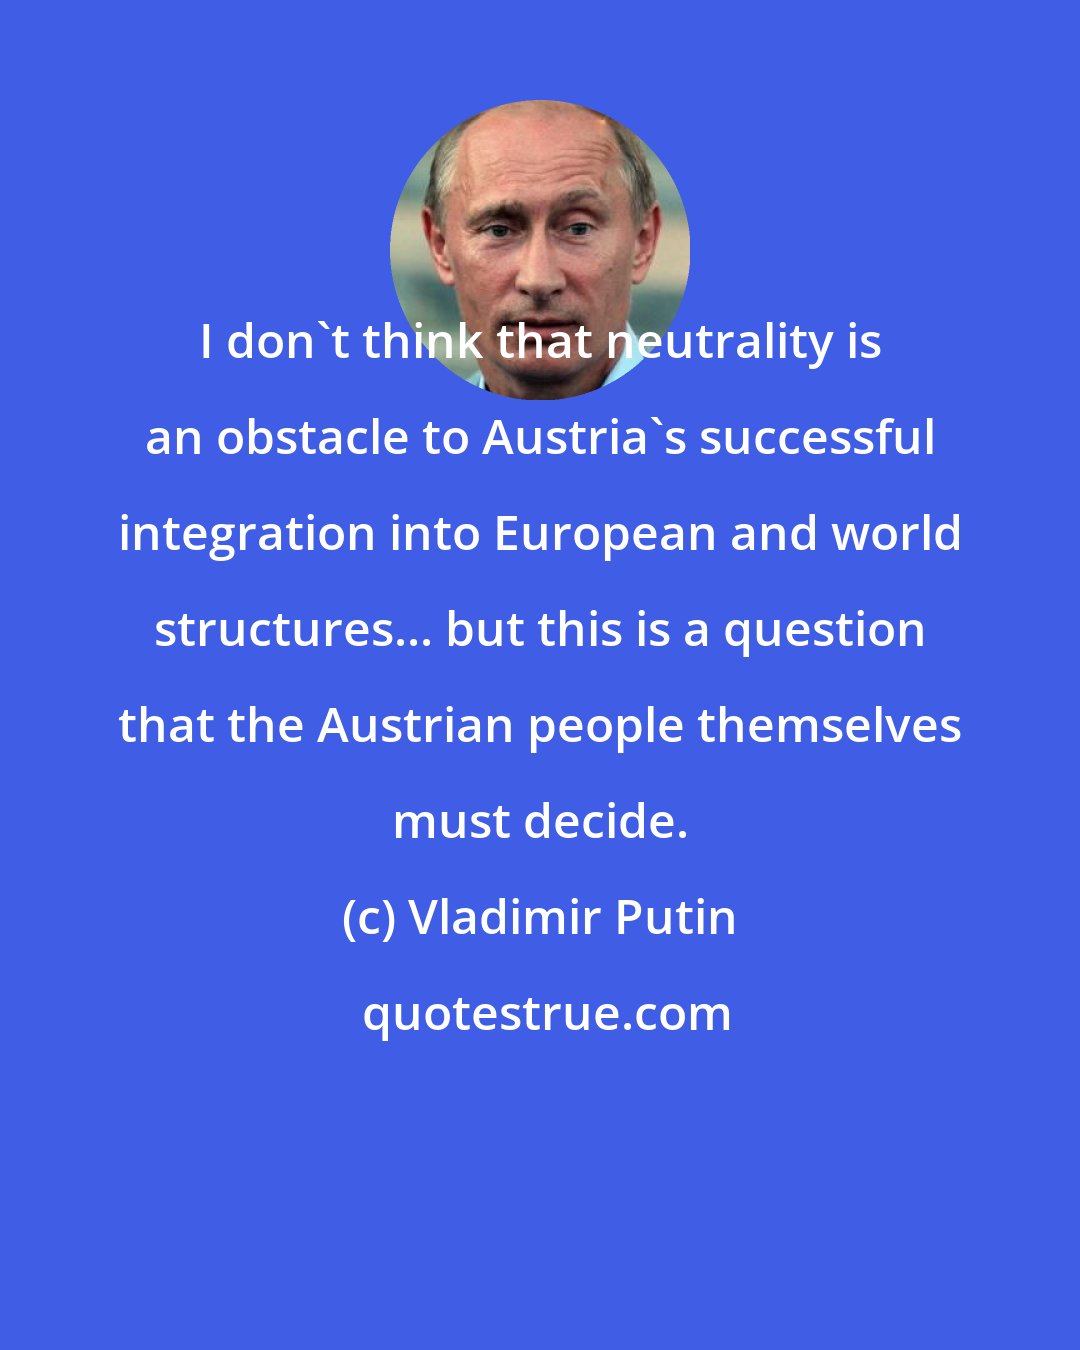 Vladimir Putin: I don't think that neutrality is an obstacle to Austria's successful integration into European and world structures... but this is a question that the Austrian people themselves must decide.